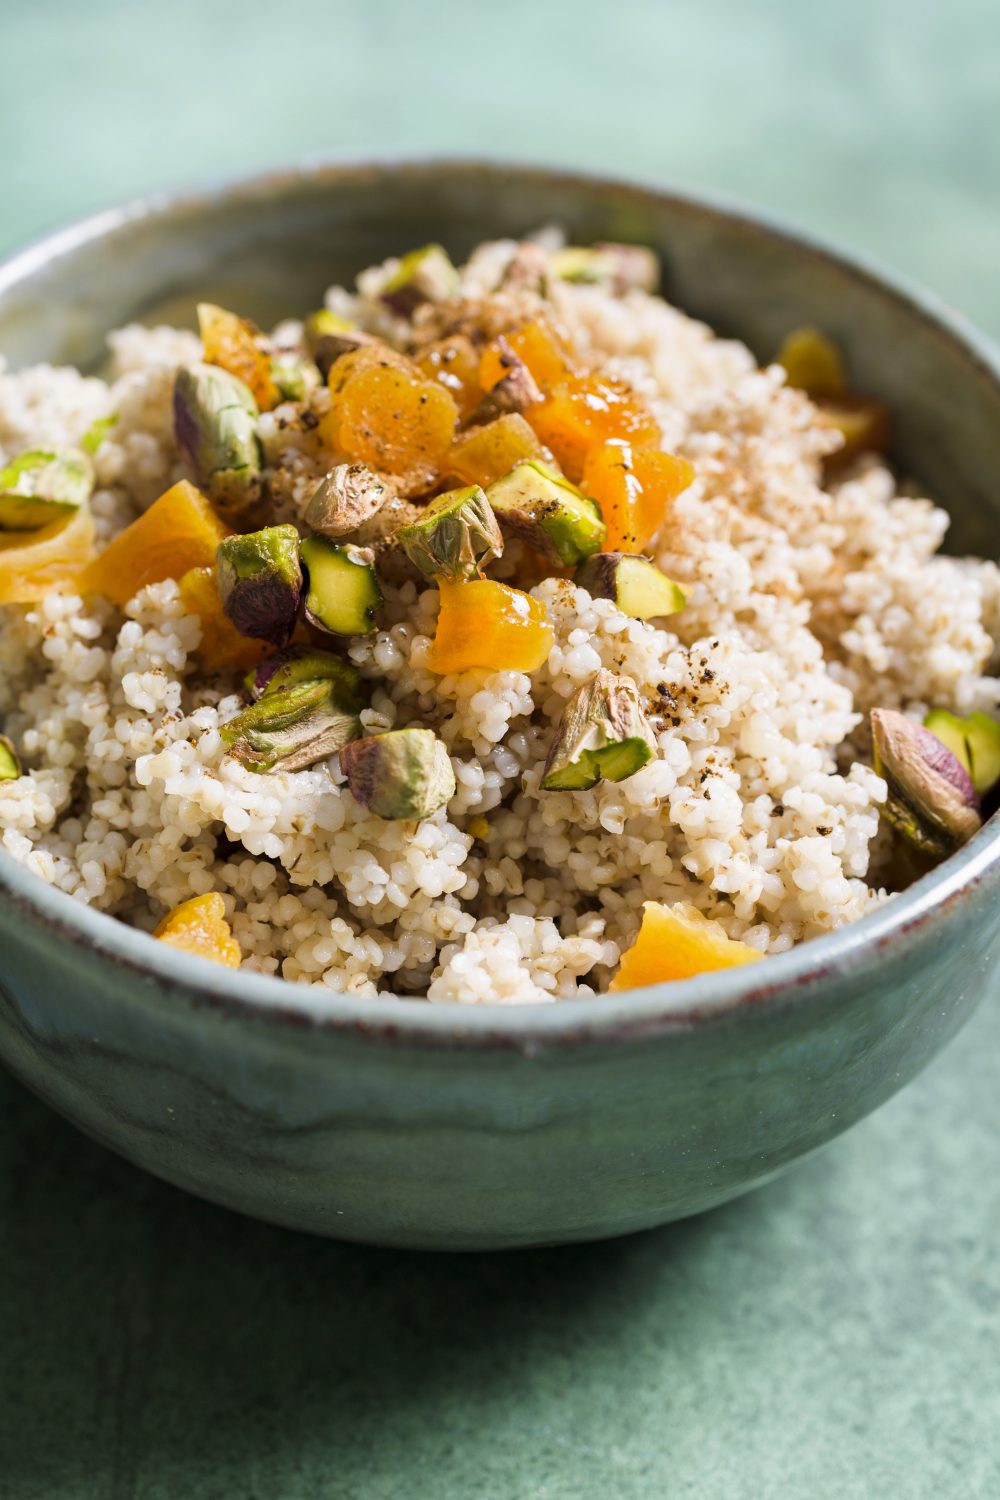 Couscous belboula is a firmer, nuttier version of the classic.